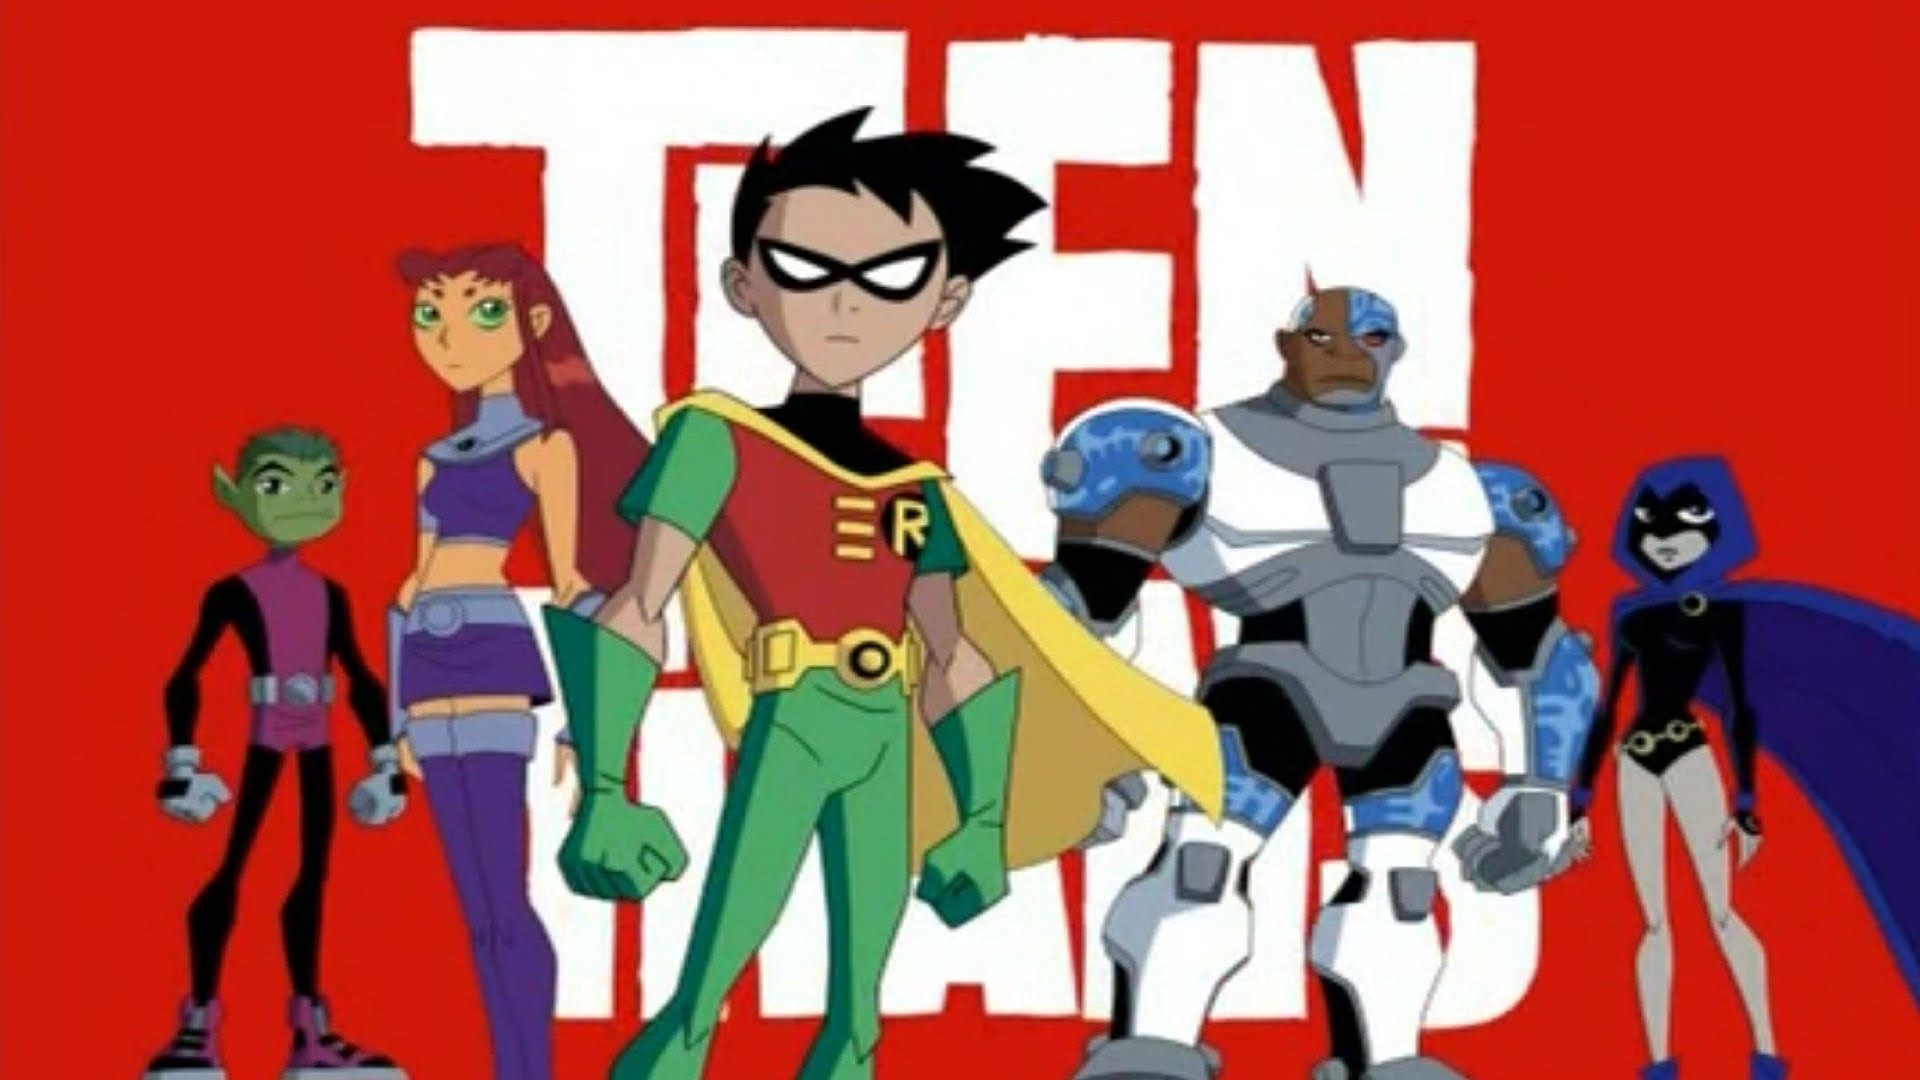 1920x1080 Nice Images Collection: Teen Titans Desktop Wallpapers